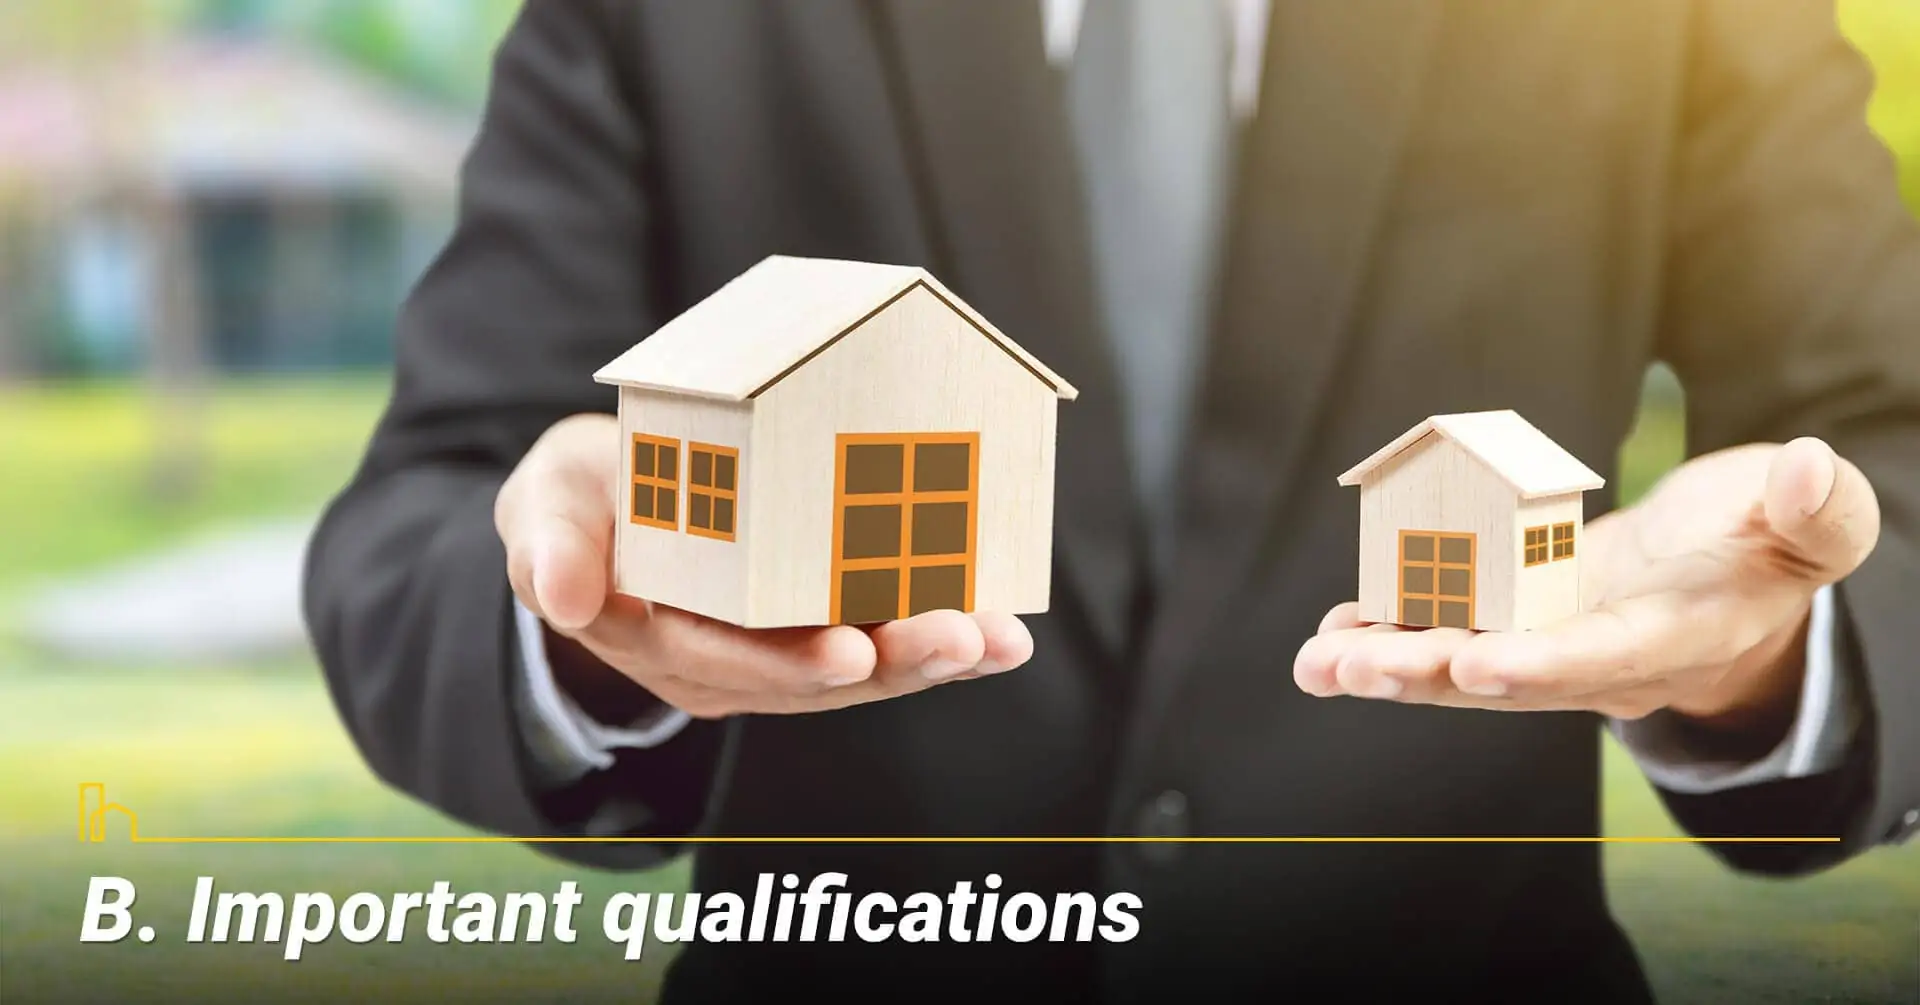 Important qualifications, qualified agent